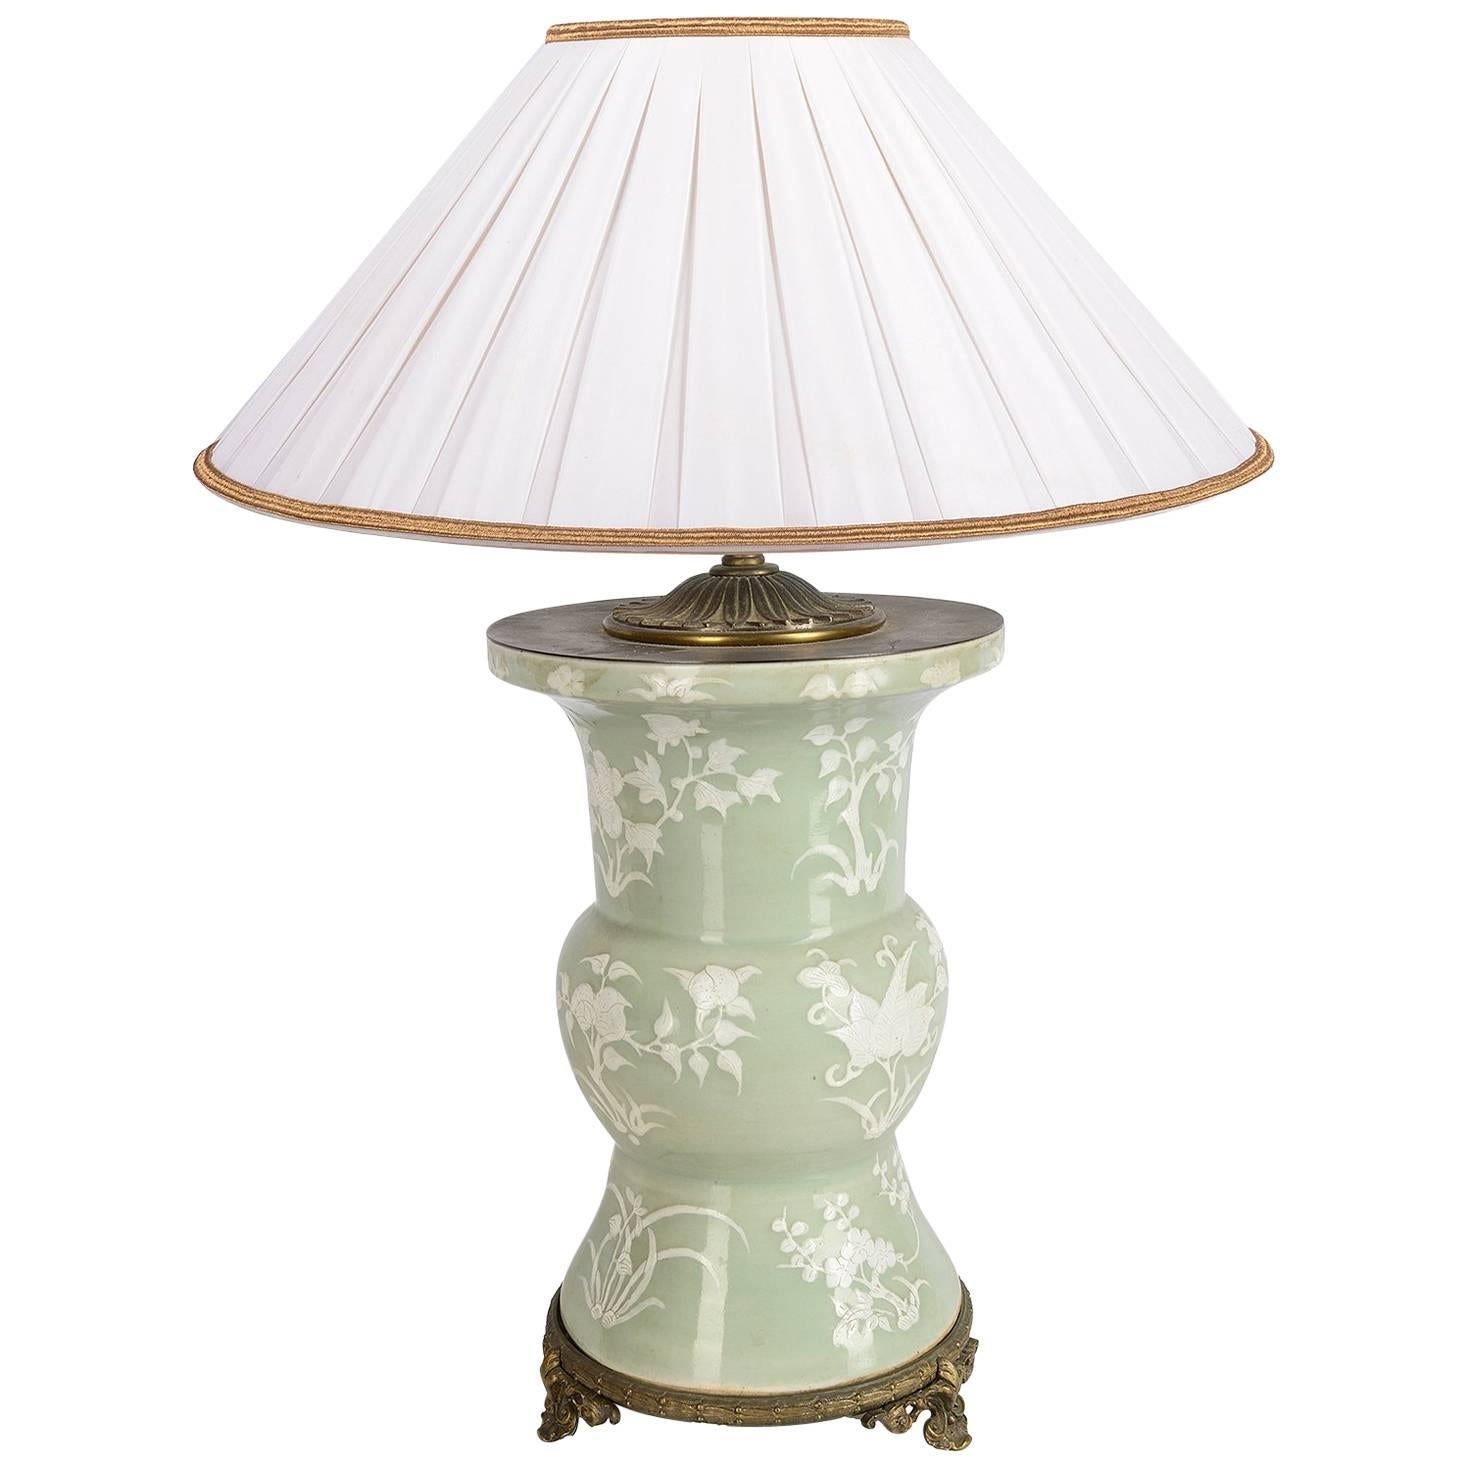 19th Century Chinese Celadon Lave or Lamp